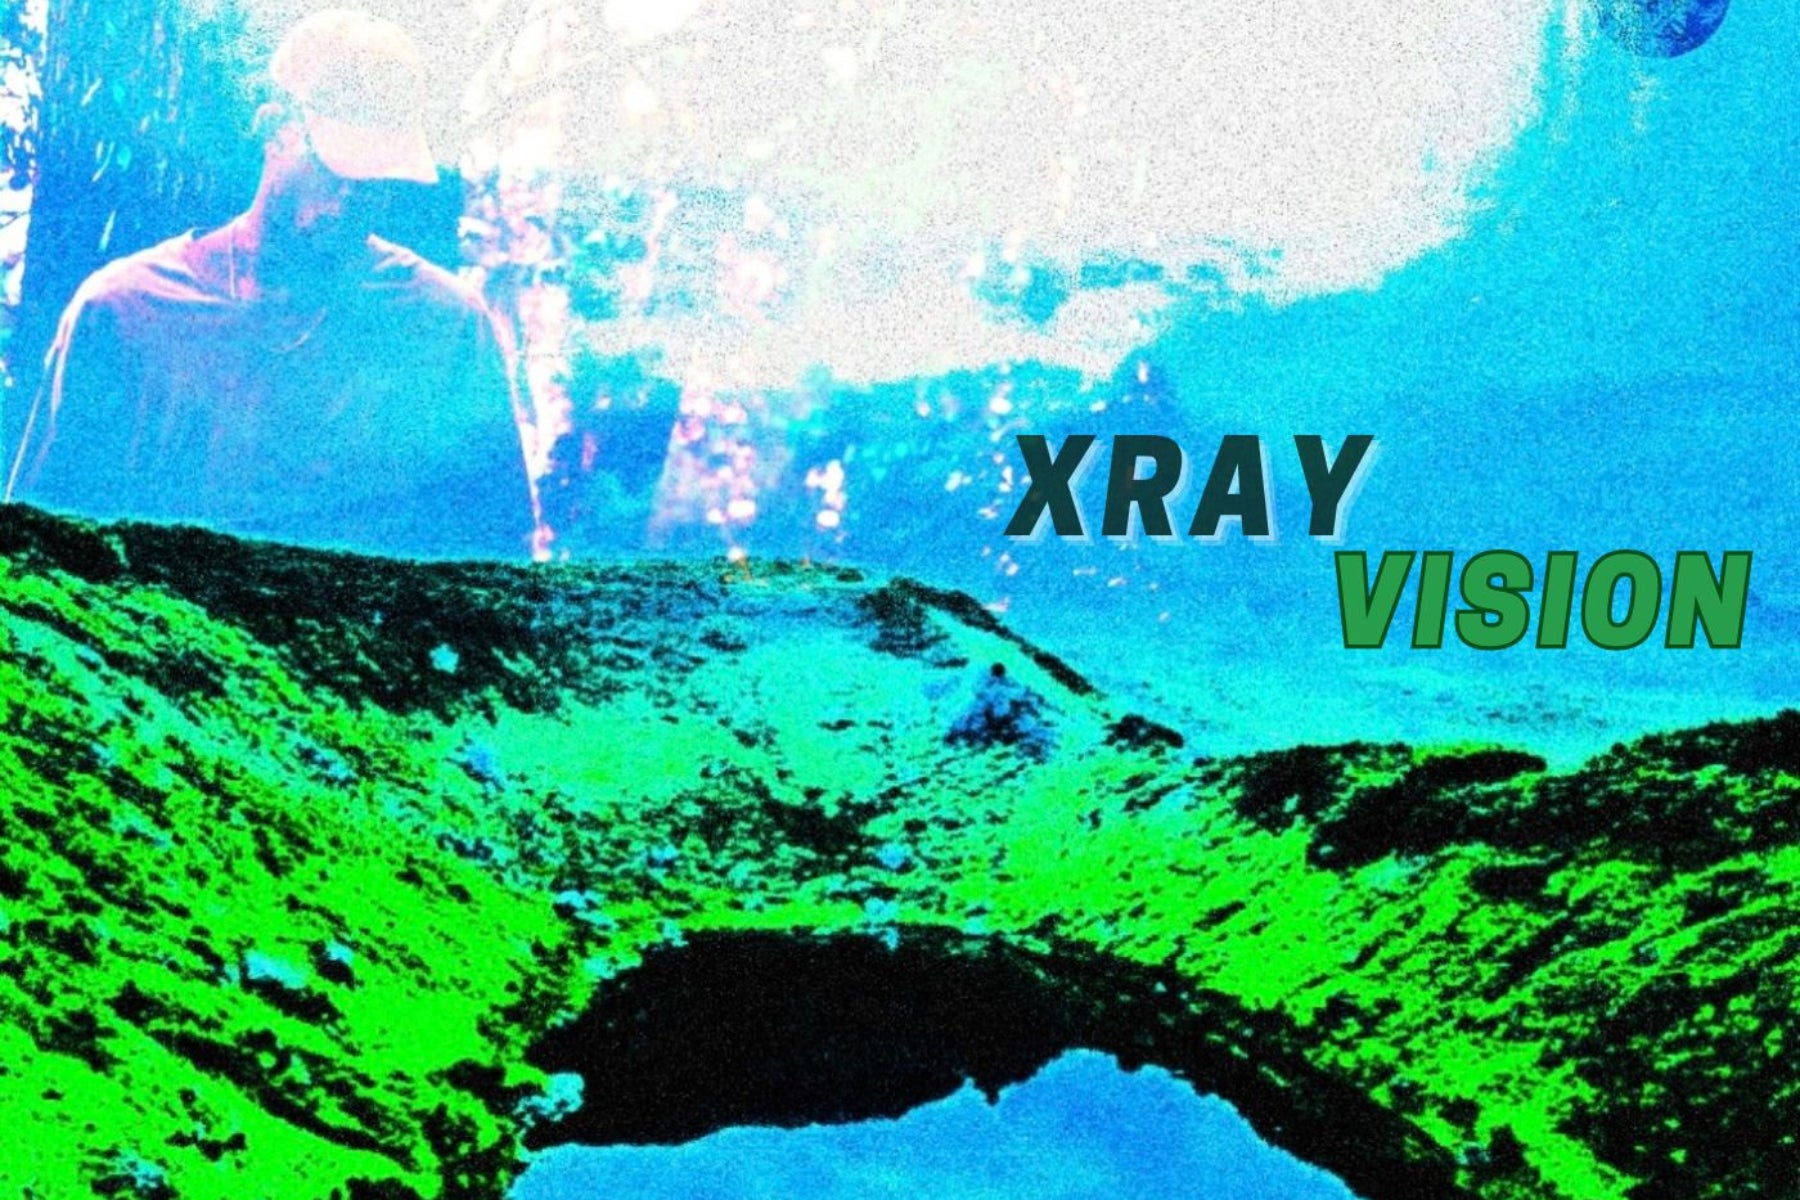 CYNiKAL & 4.47 FM Set The Stage For New Album 'PURiTY' With New Cut 'XRAY ViSiON'